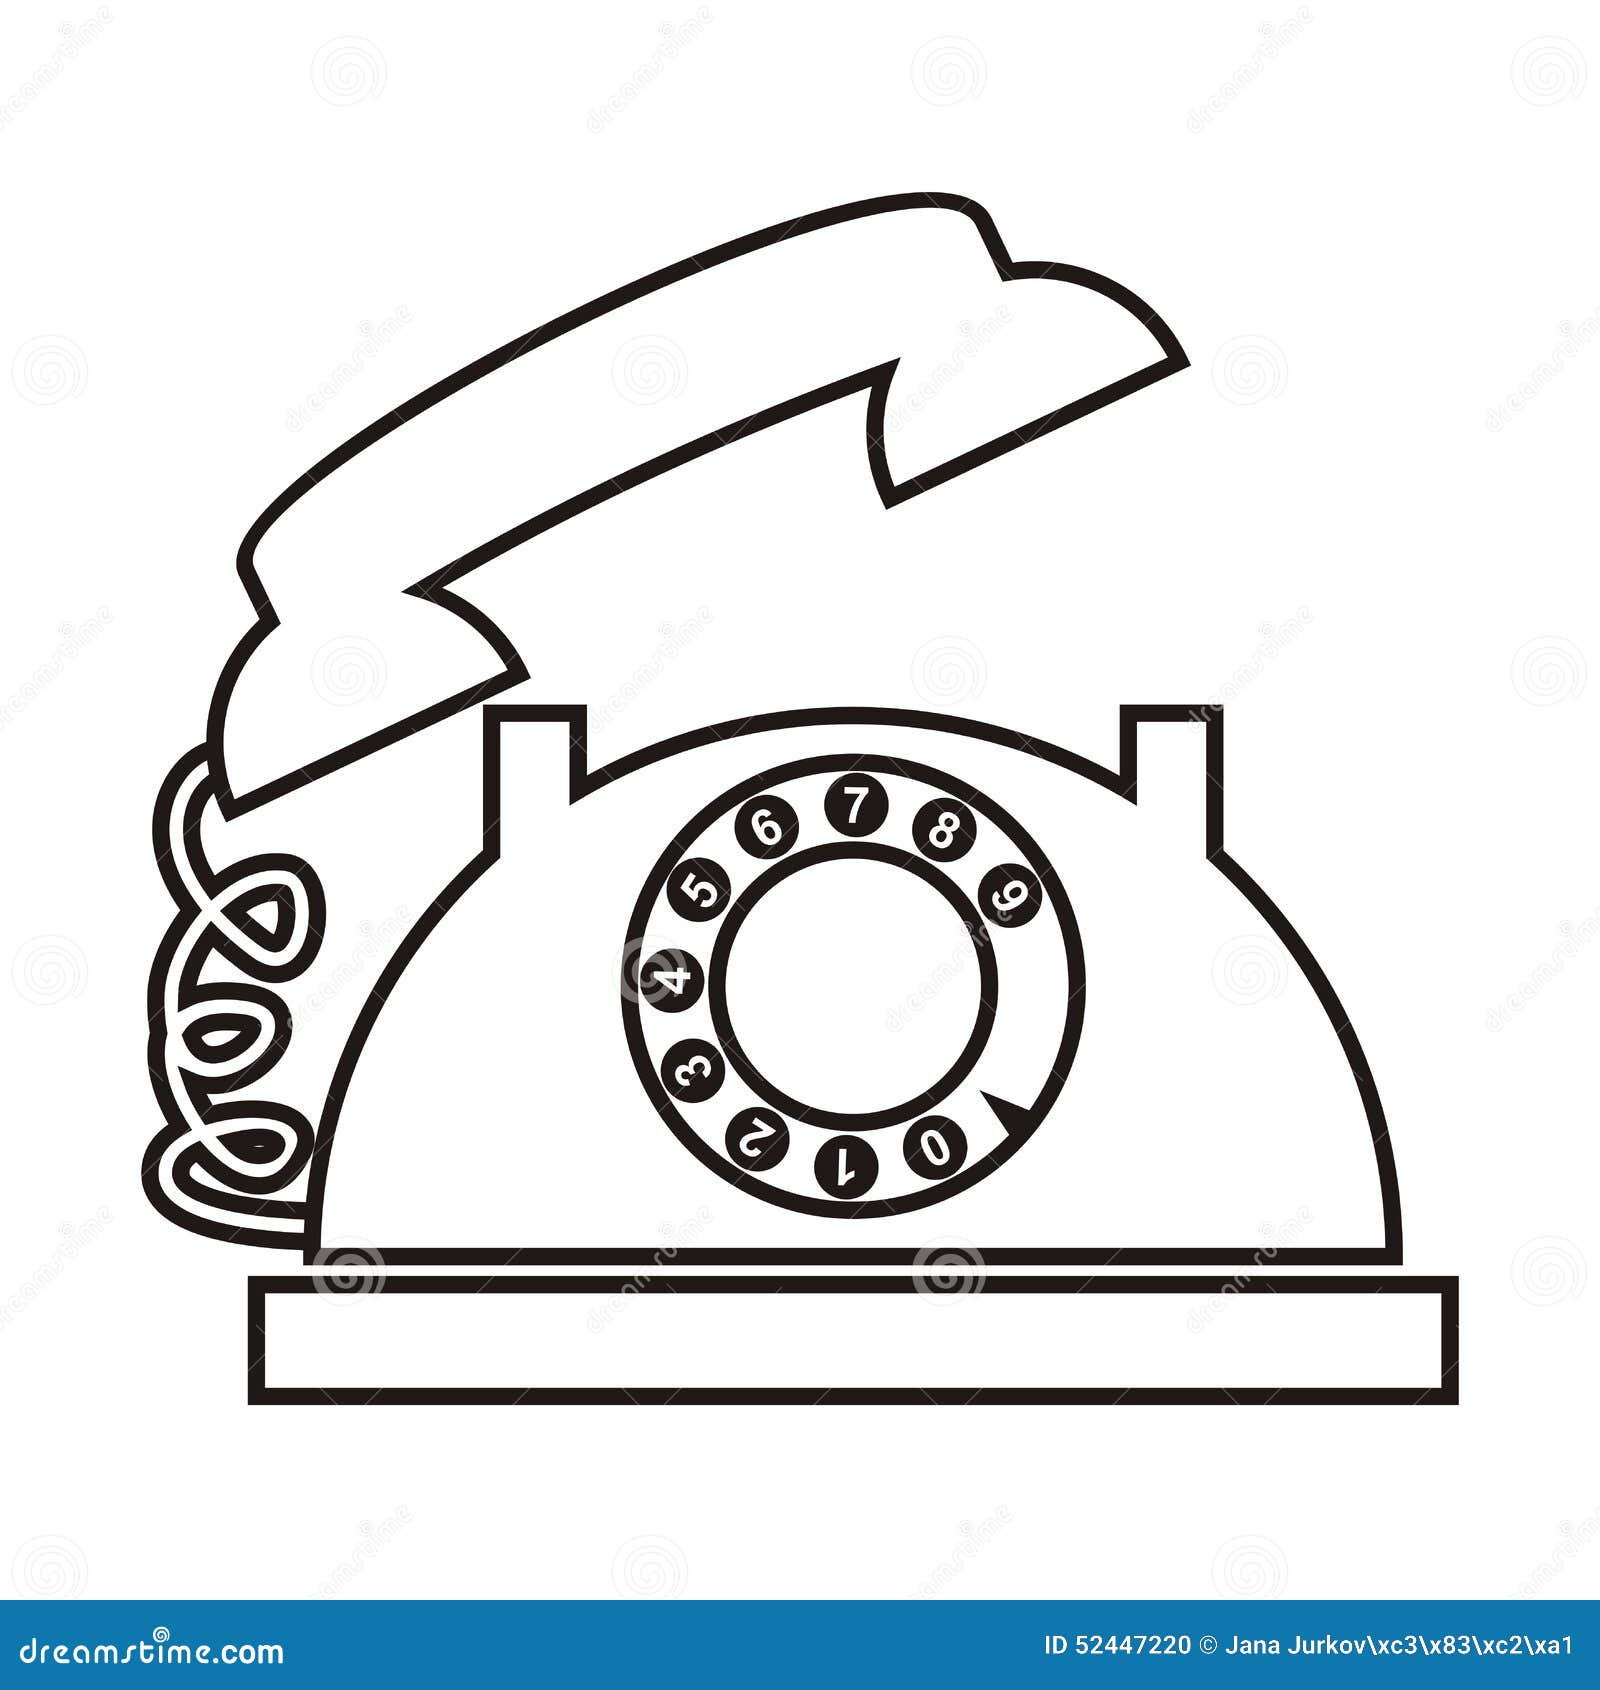 Telephone coloring stock illustrations â telephone coloring stock illustrations vectors clipart